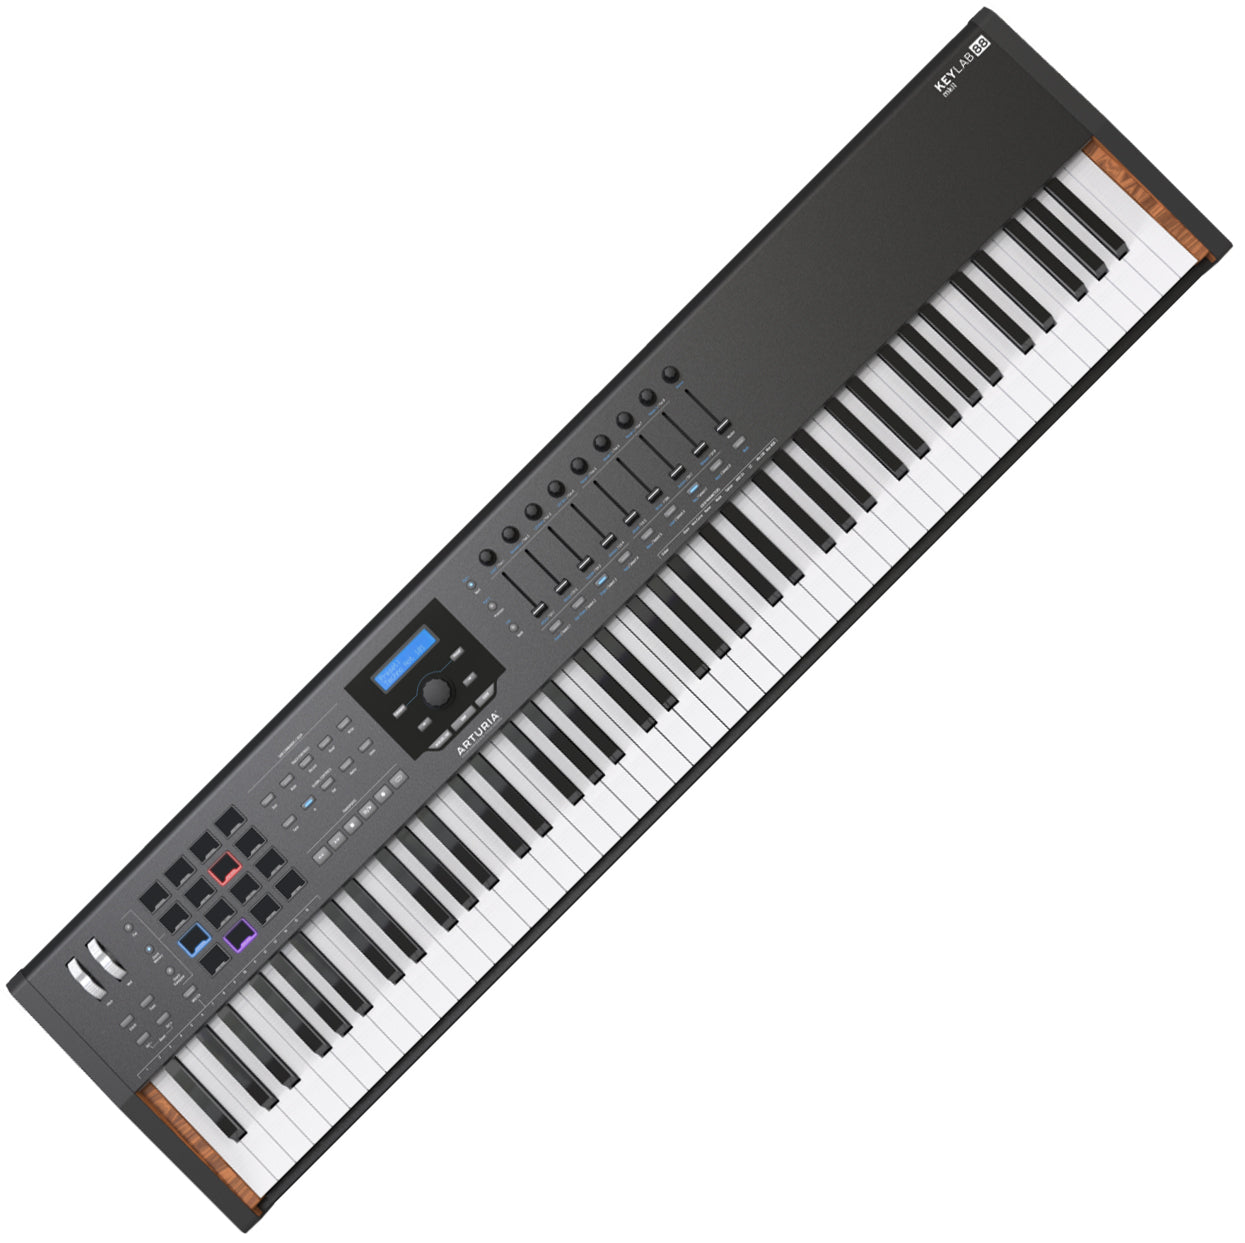 Arturia Keylab 88 MKII 88 Keys USB 2.0 Universal MIDI Keyboard Controller with Multi Presets and Assignable Controls for DJs, Musicians, and Music Producers - Black Edition